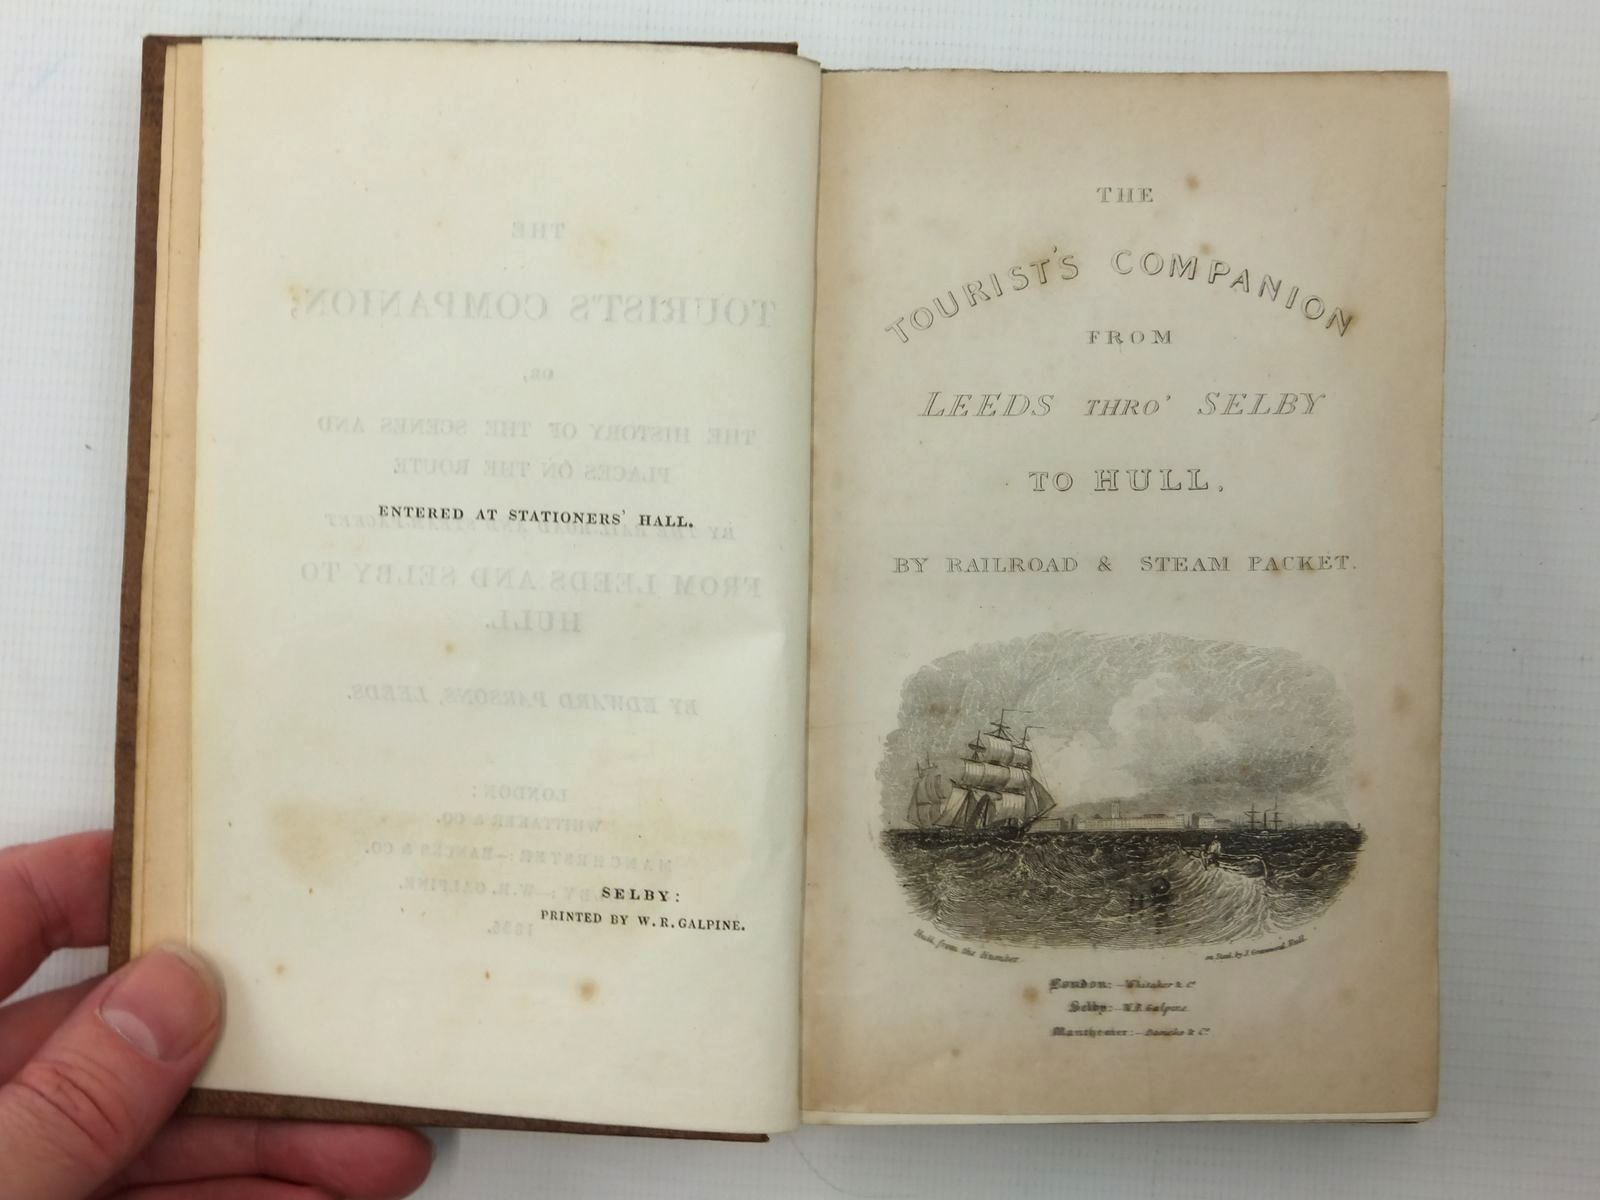 Photo of THE TOURIST'S COMPANION FROM LEEDS THRO' SELBY TO HULL BY RAILROAD & STEAM PACKET written by Parsons, Edward published by Whittaker & Co. (STOCK CODE: 2123647)  for sale by Stella & Rose's Books